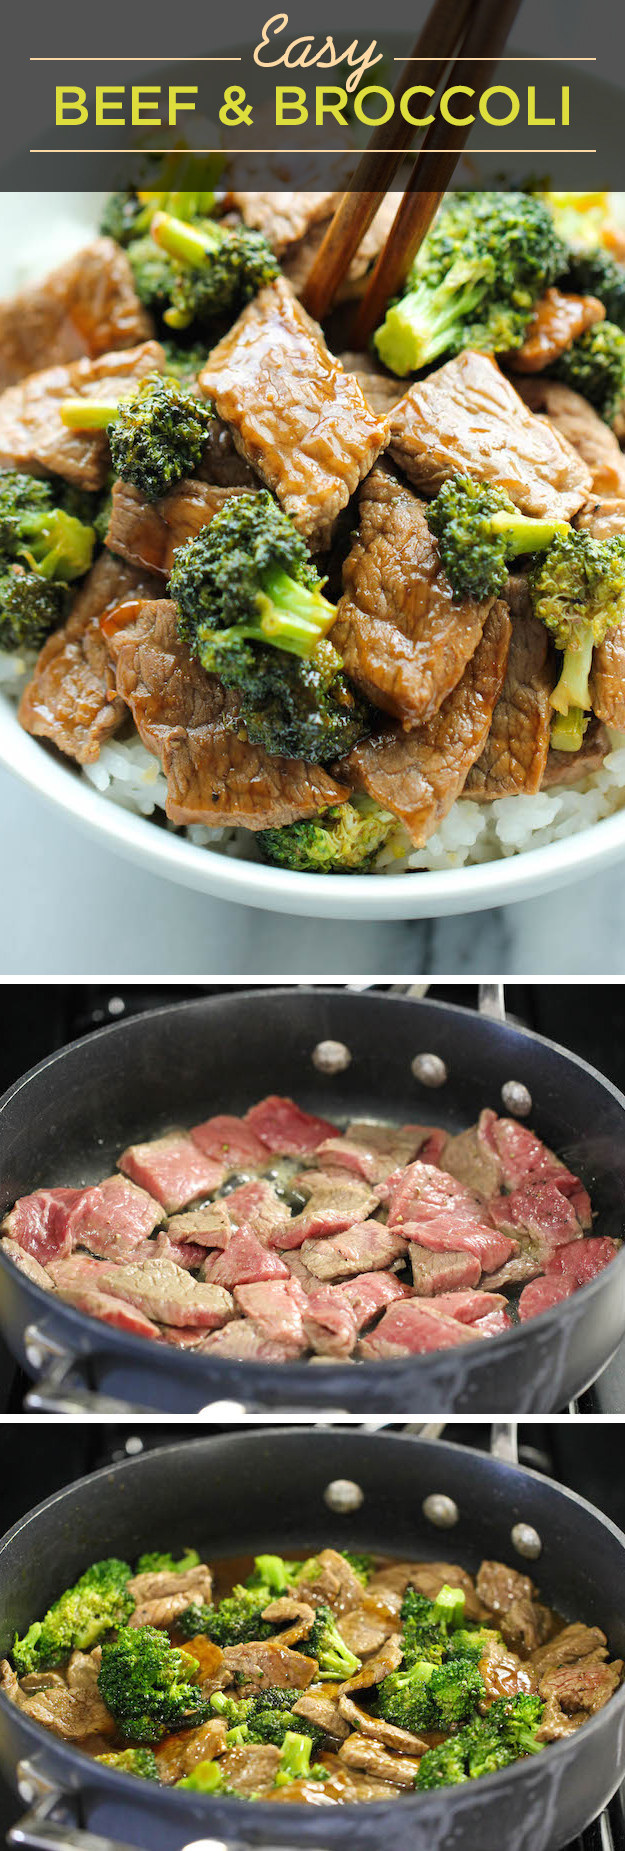 Here Are 7 Delicious Dinners For Busy Weeknights